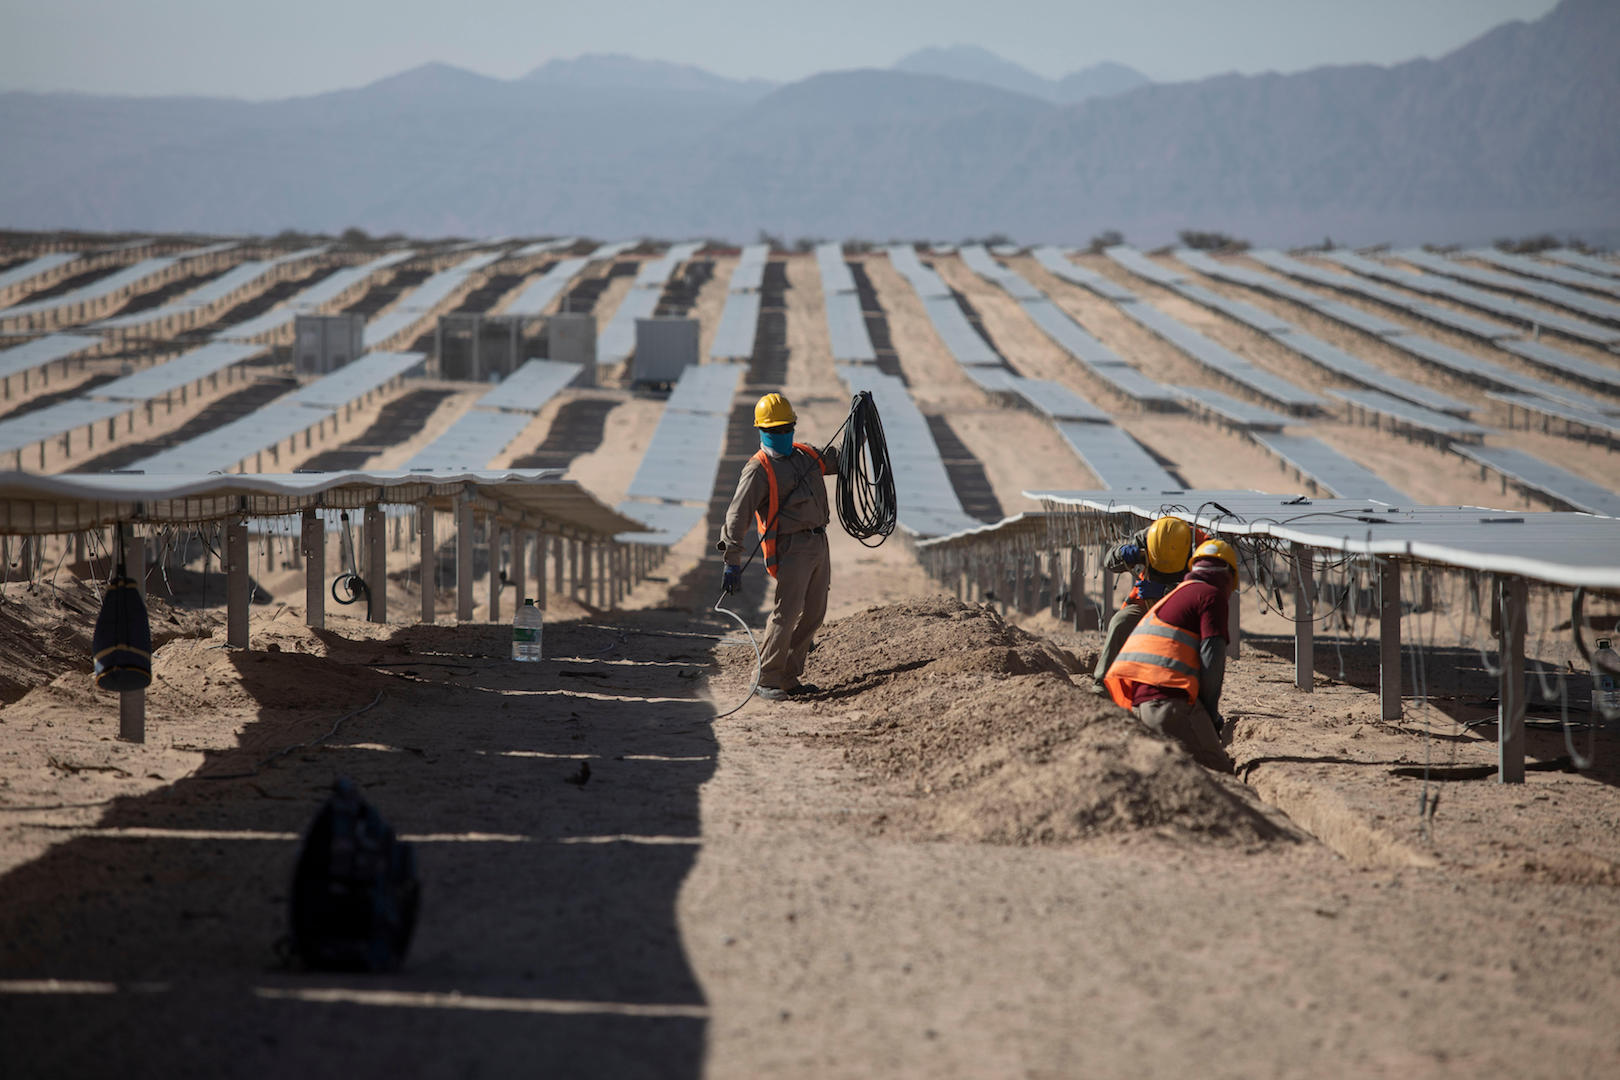 workers at a Solar photovoltaic plants in Cafayate, Salta province, Argentina